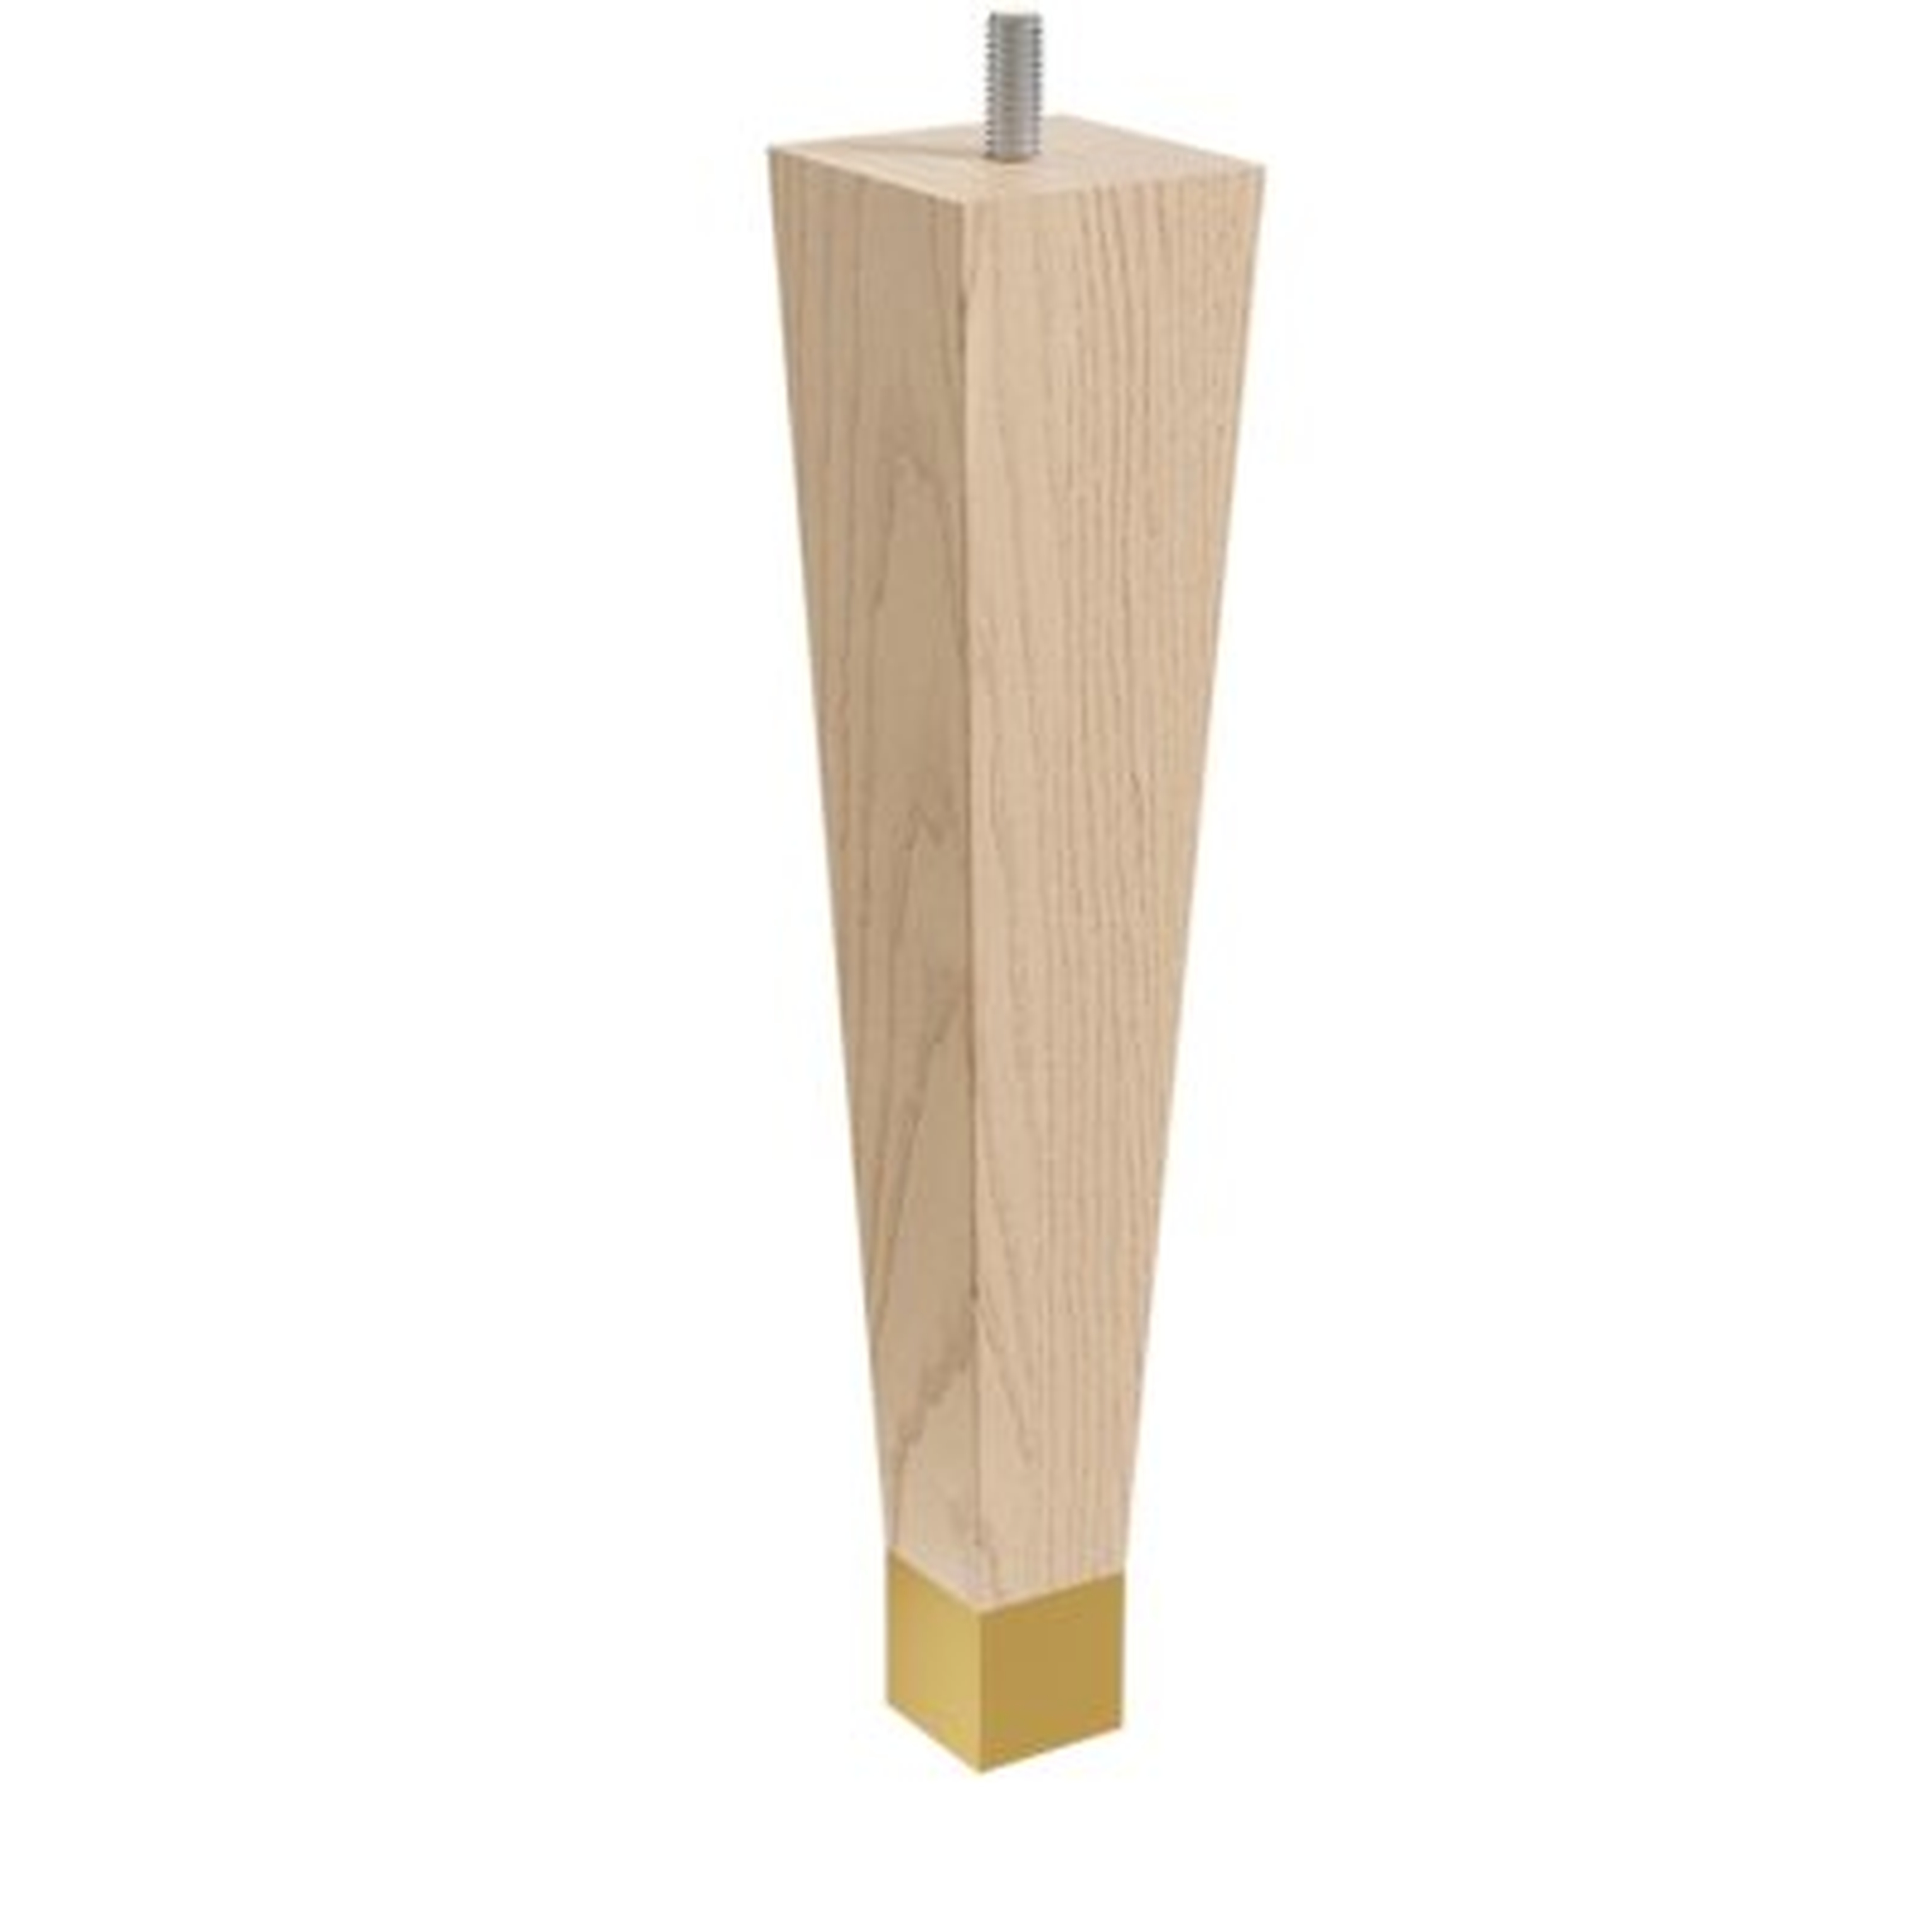 Square Tapered Ash Leg With 1" Ferrule And Clear Finish - Wayfair